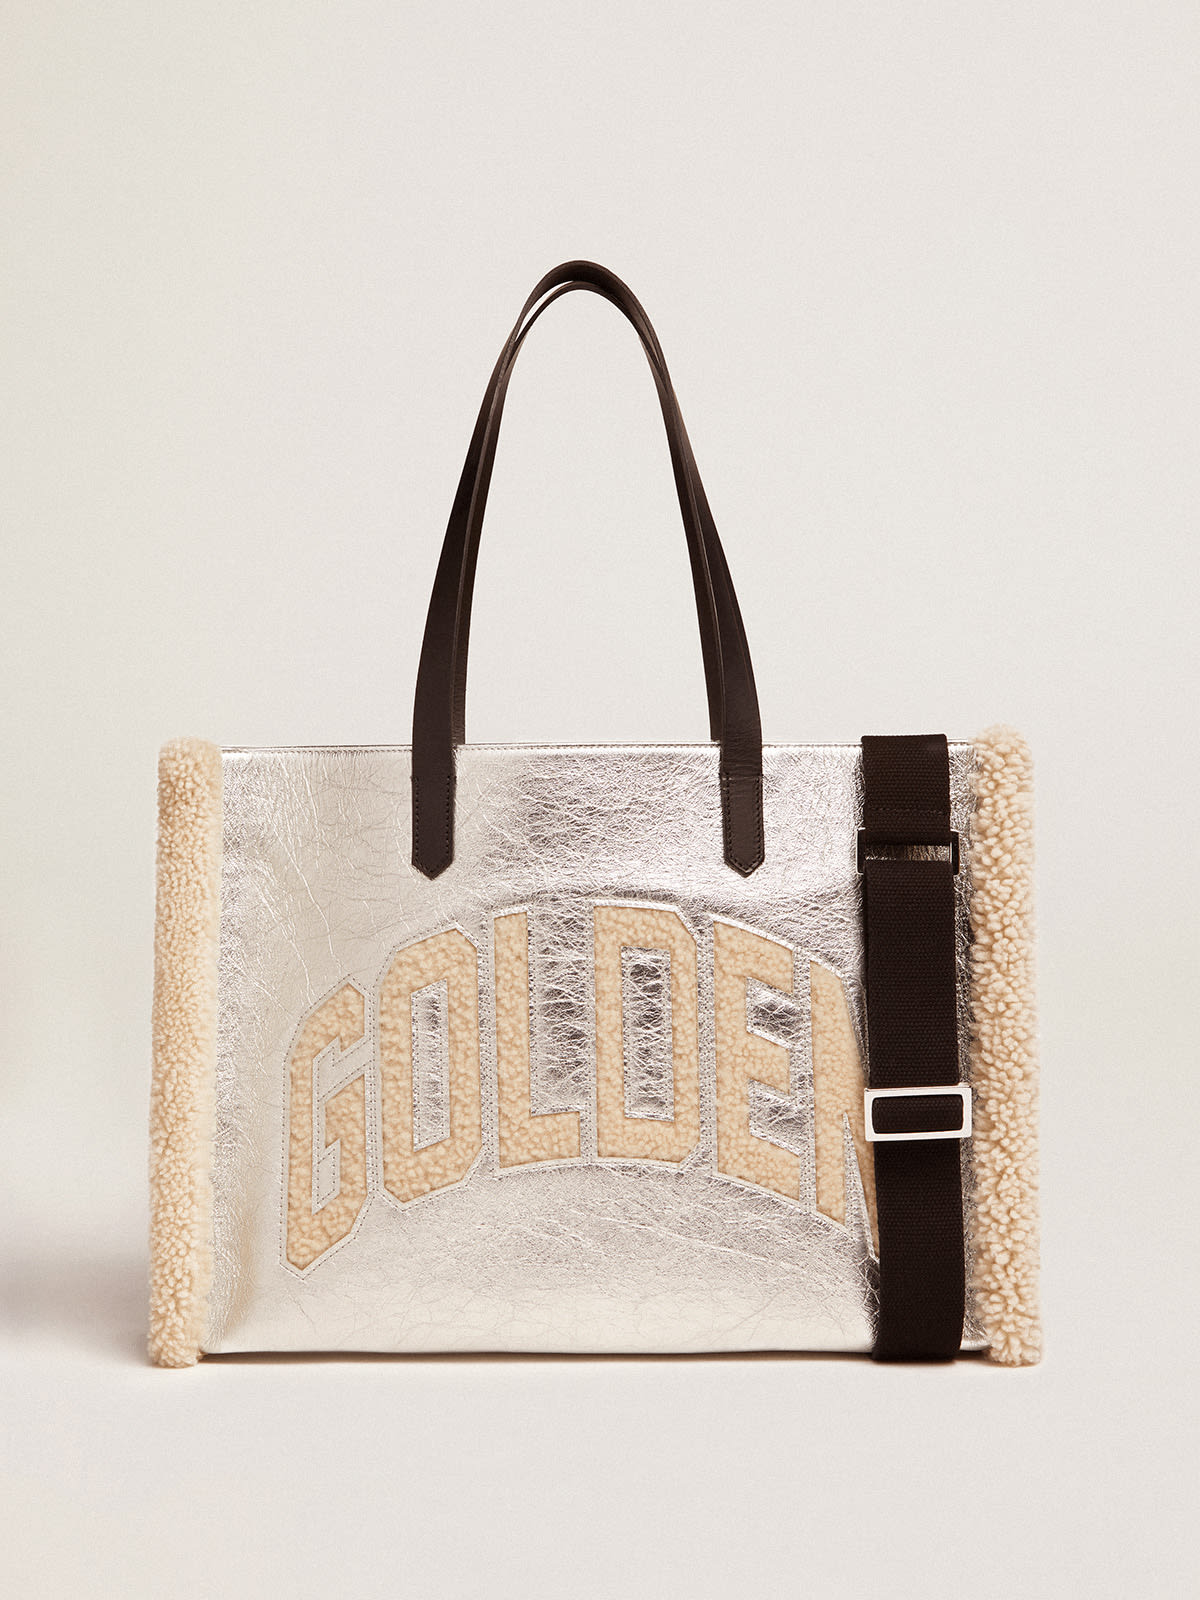 Golden Goose - East-West California Bag in silver laminated leather with merino wool inserts in 